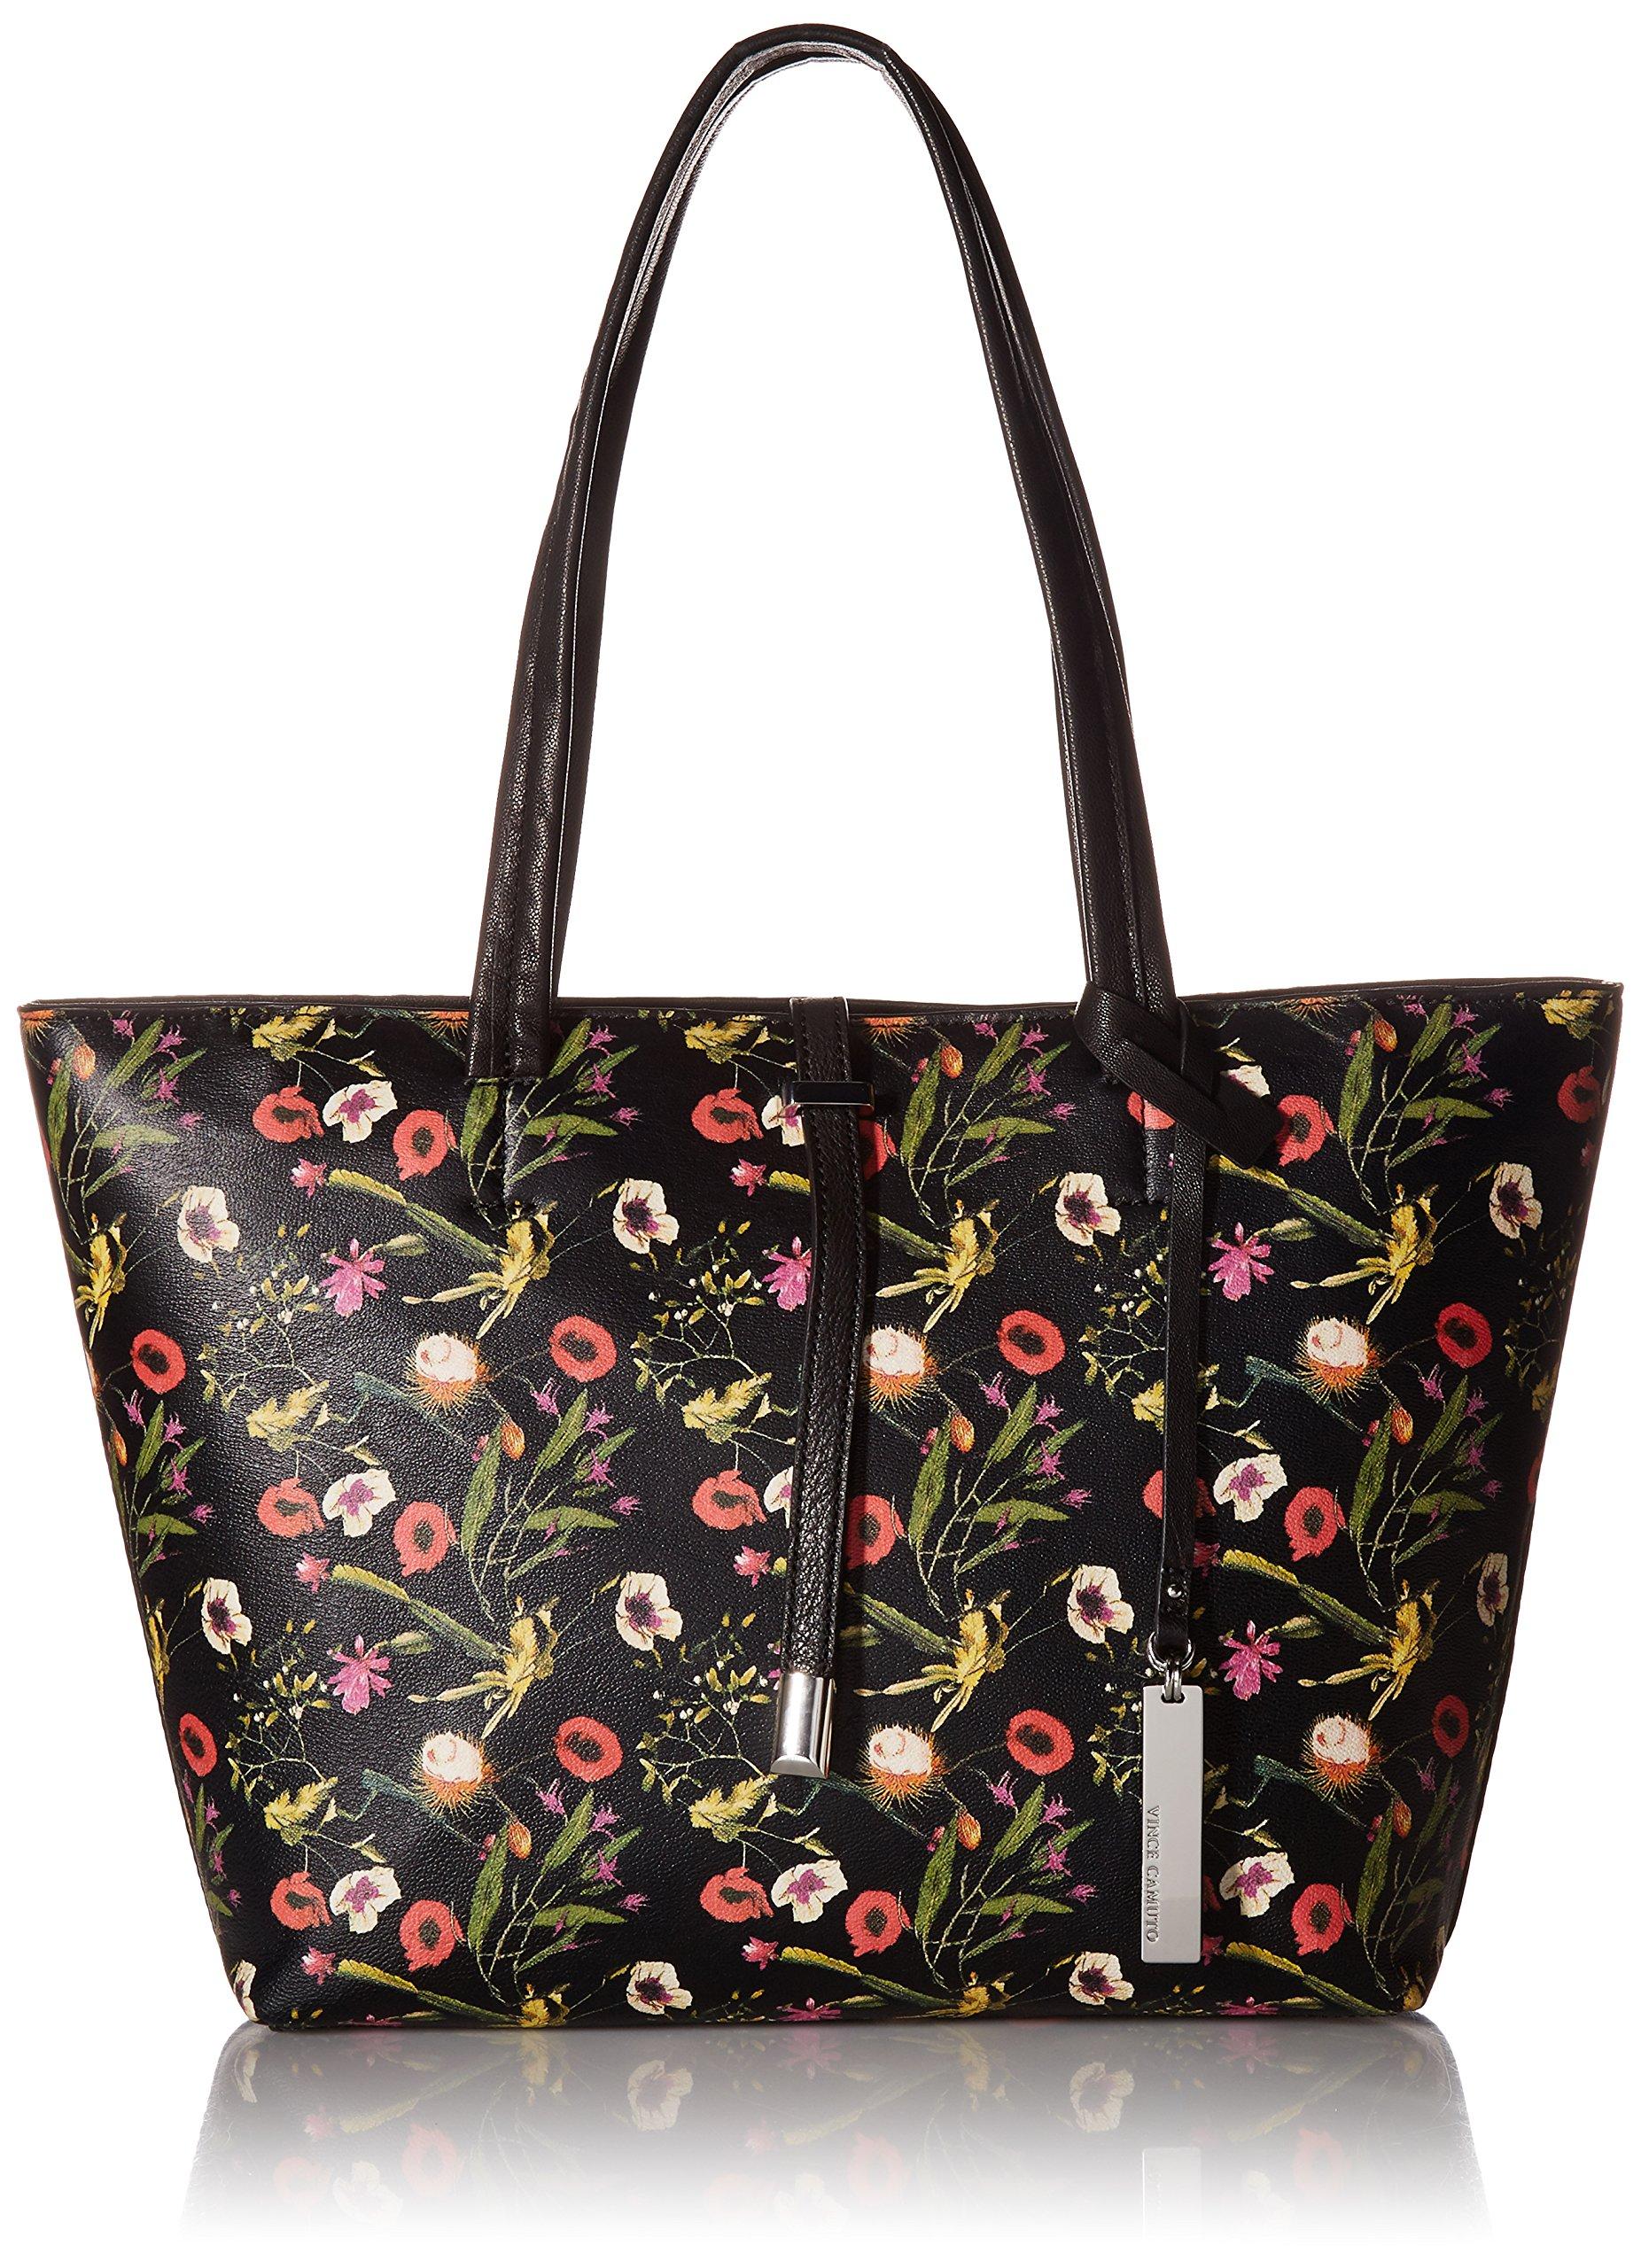 Vince Camuto Leila Tote, $228, Nordstrom